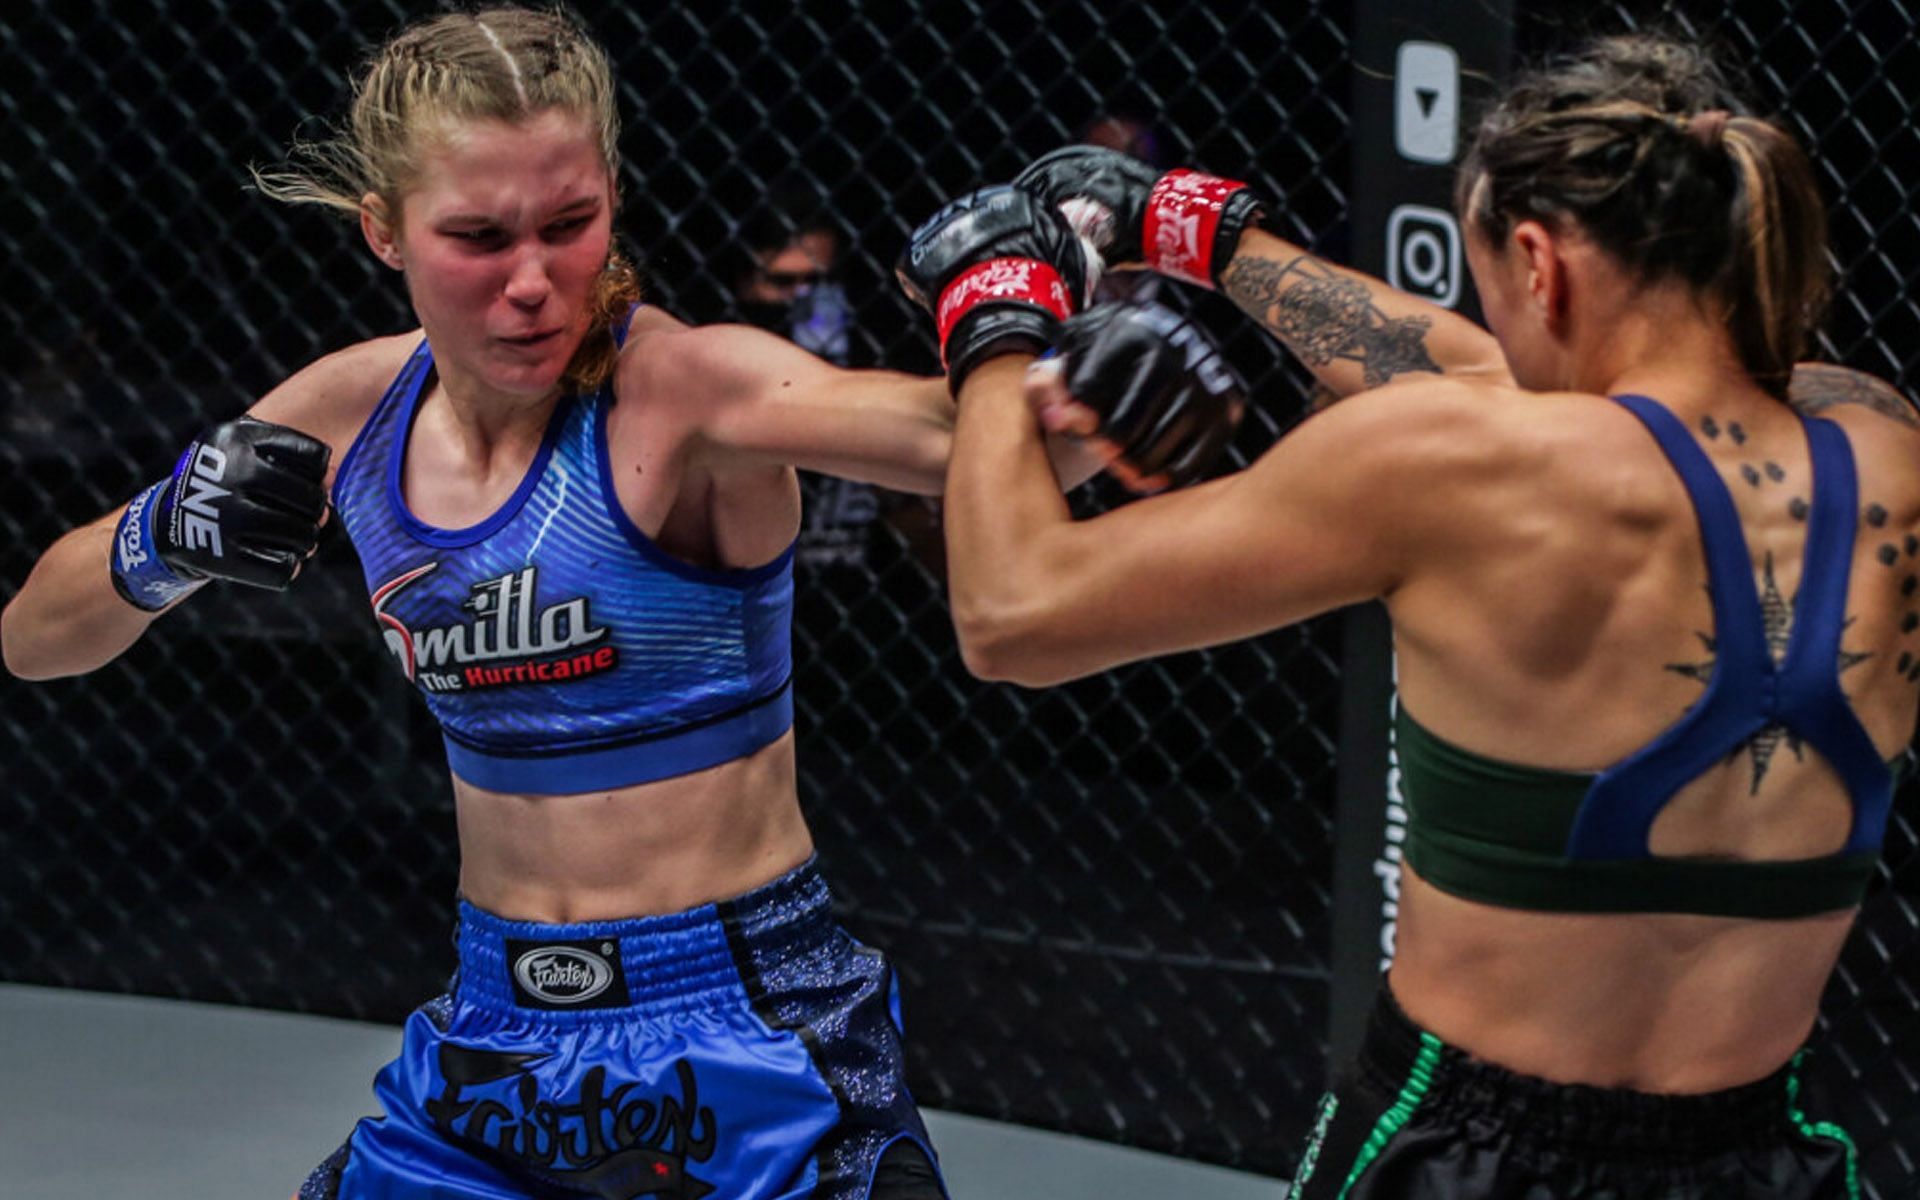 Smilla Sundell (L) has no issues competing in kickboxing or Muay Thai, as long as she gets to fight. | [Photo: ONE Championship]